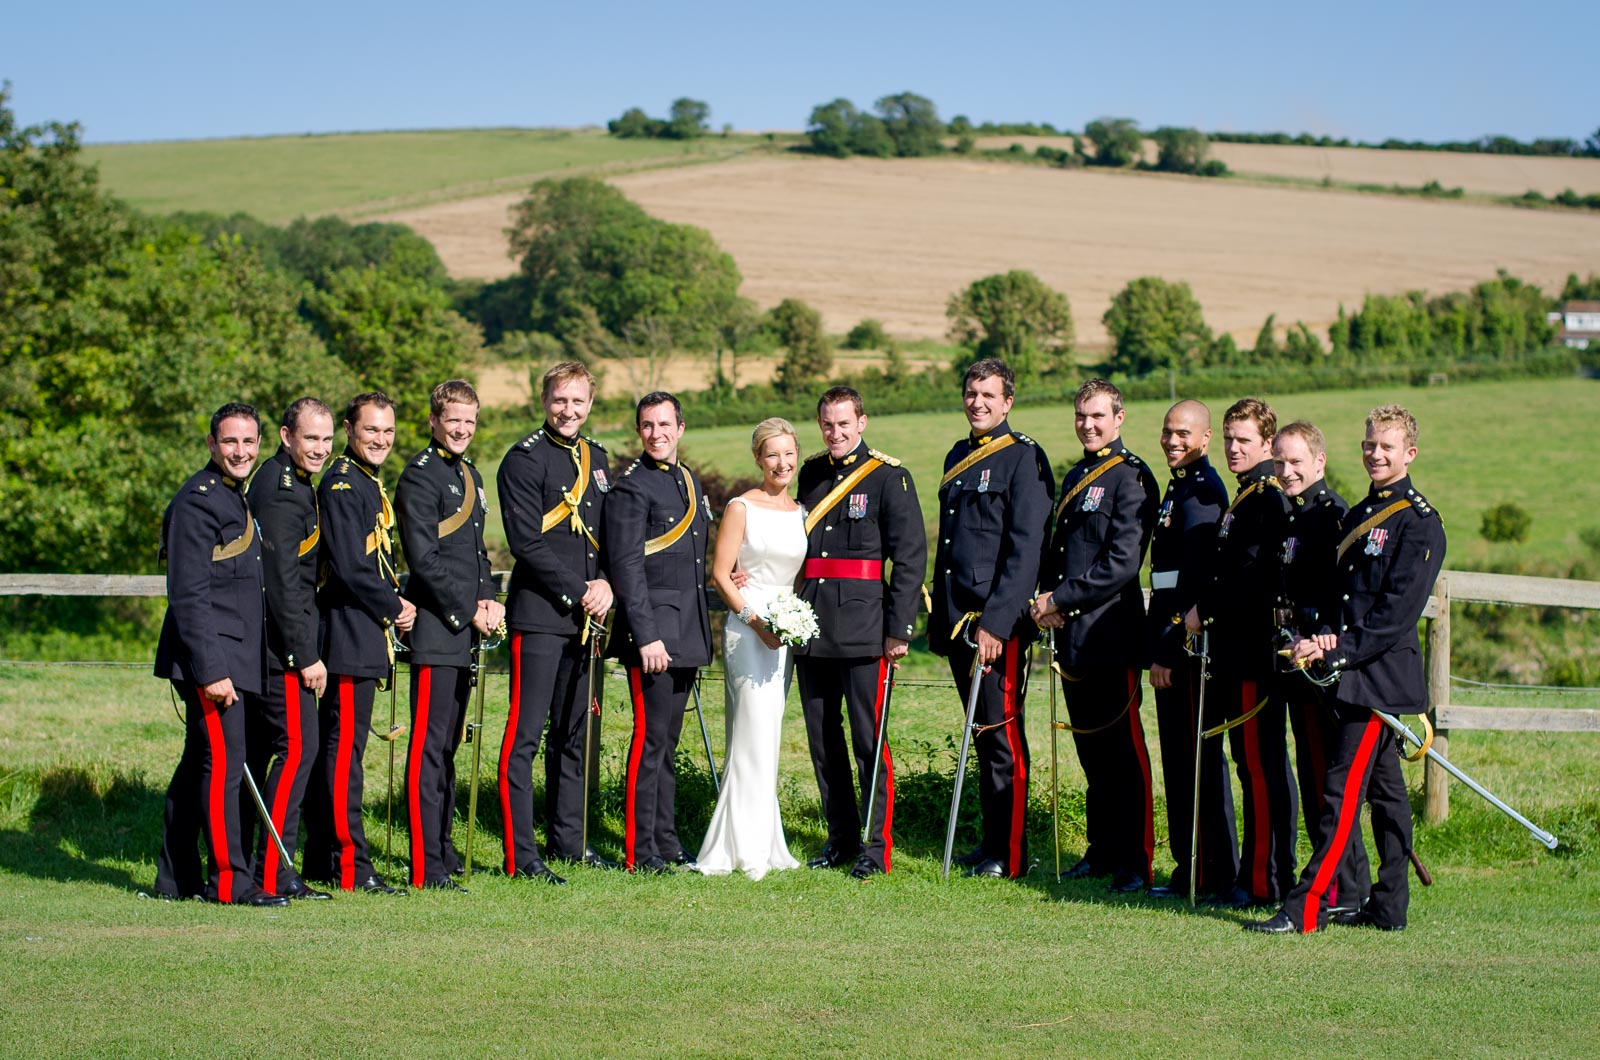 Rachael and Dan pose with Dan's army wedding guests on front of the South Downs during their wedding reception at Burpham Village Hall.